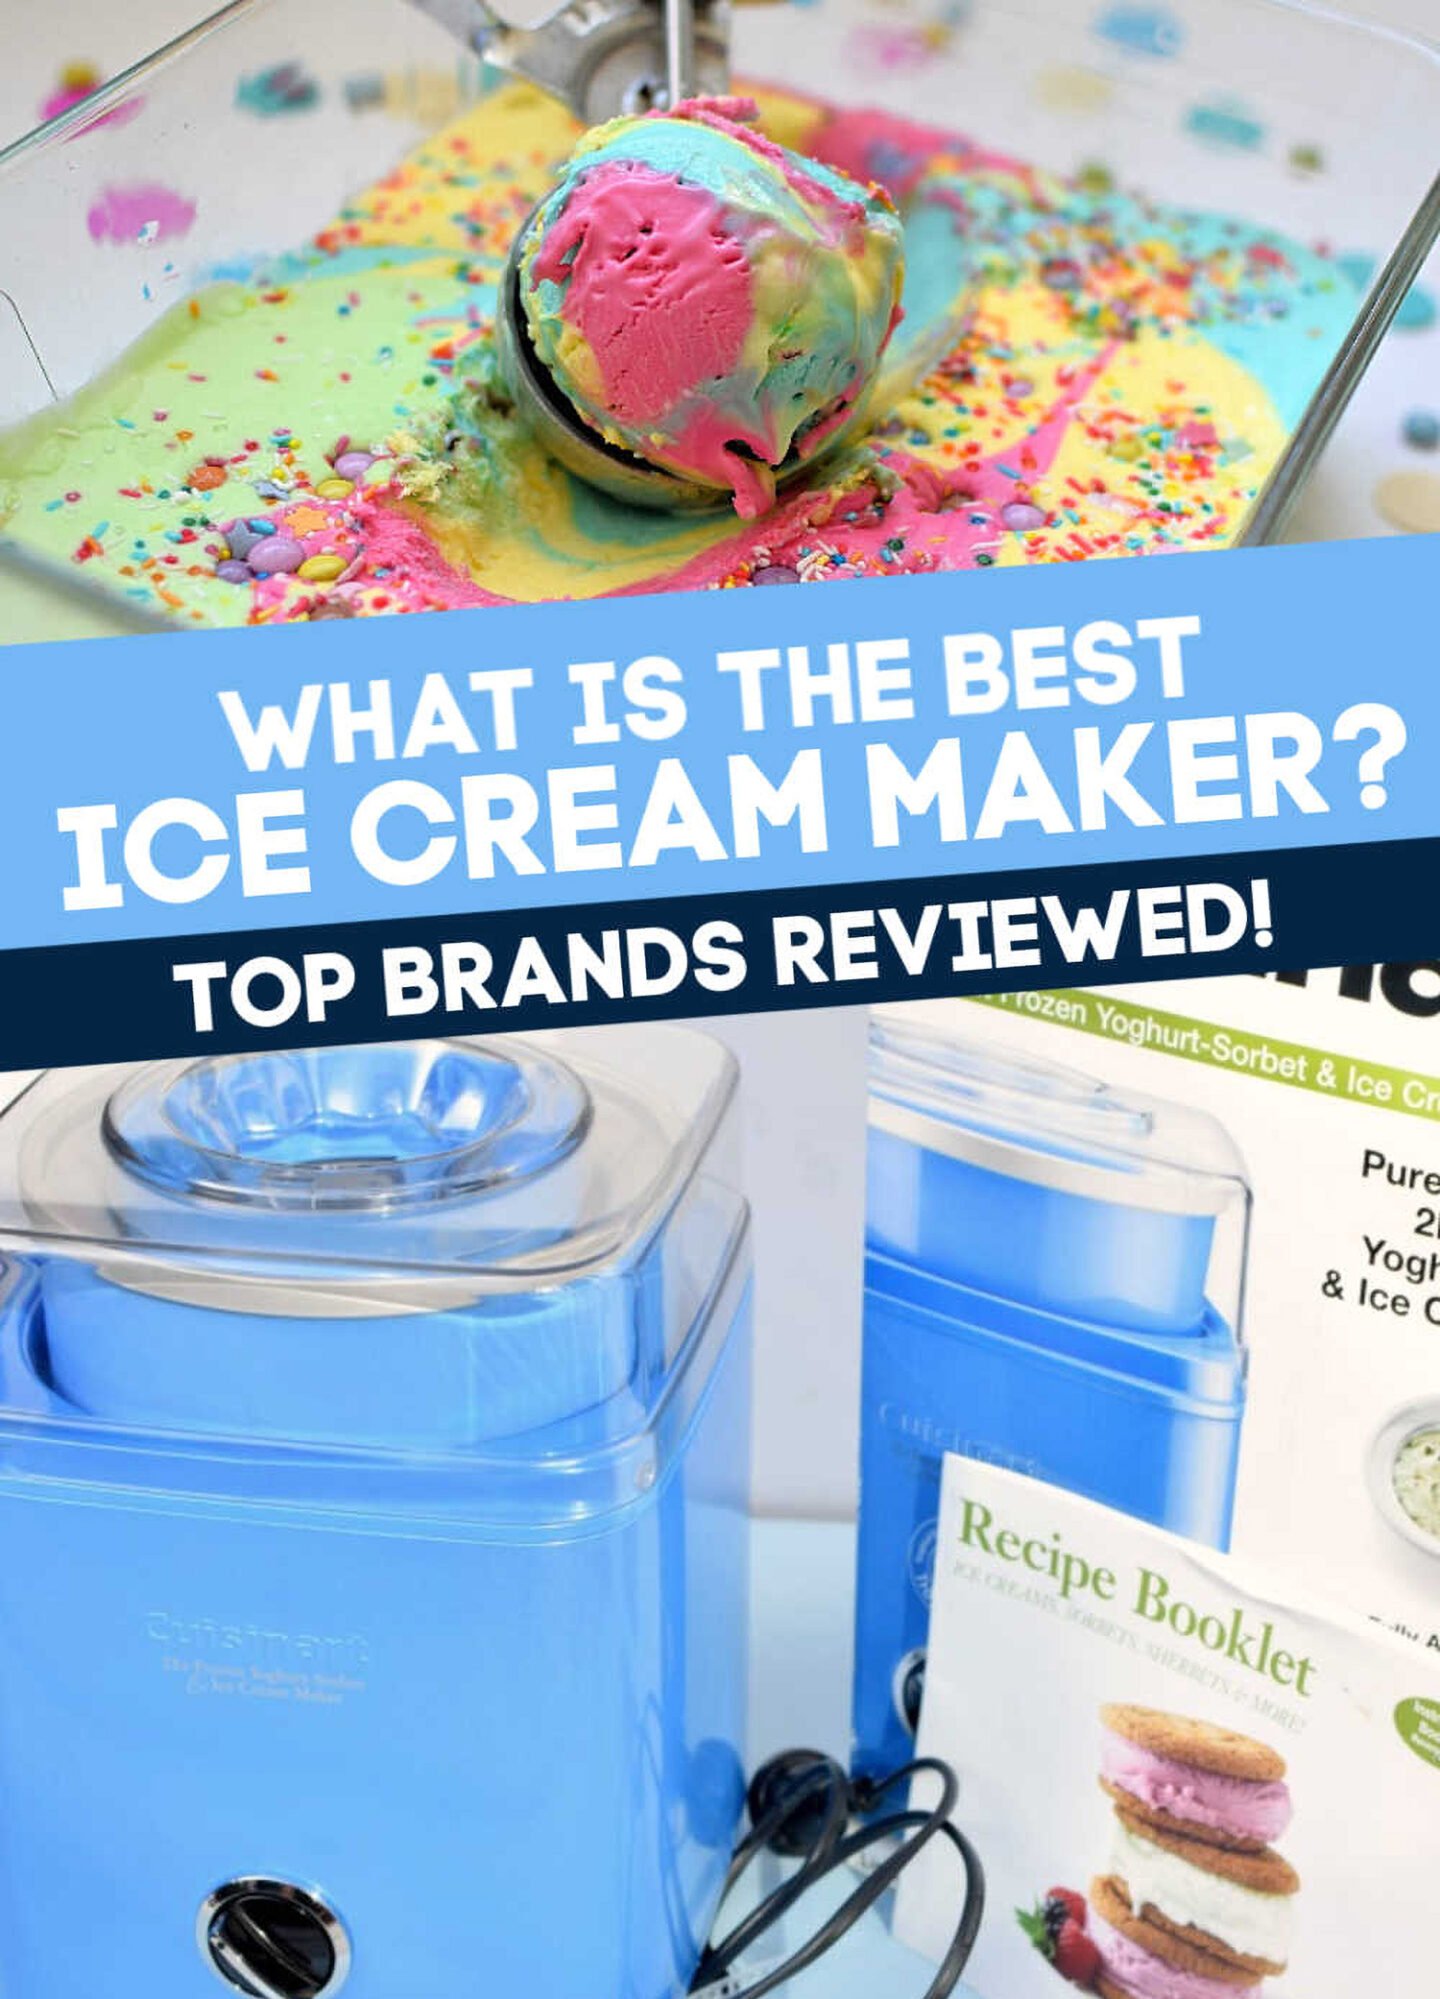 What is the best ice cream maker